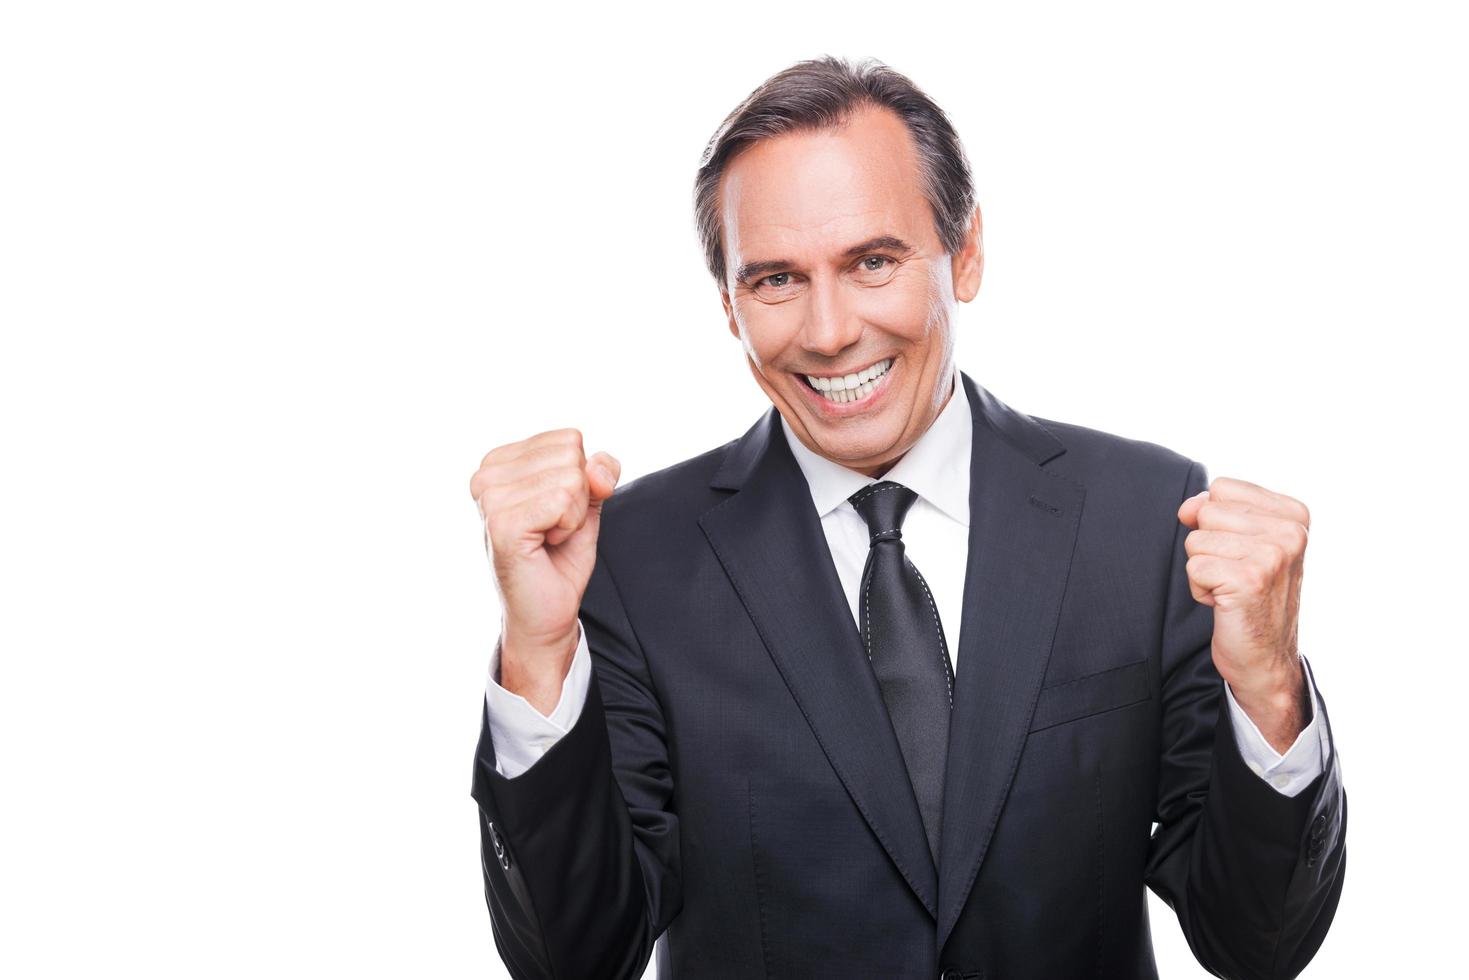 Successful businessman. Happy mature man in formalwear gesturing and smiling while standing isolated on white background photo